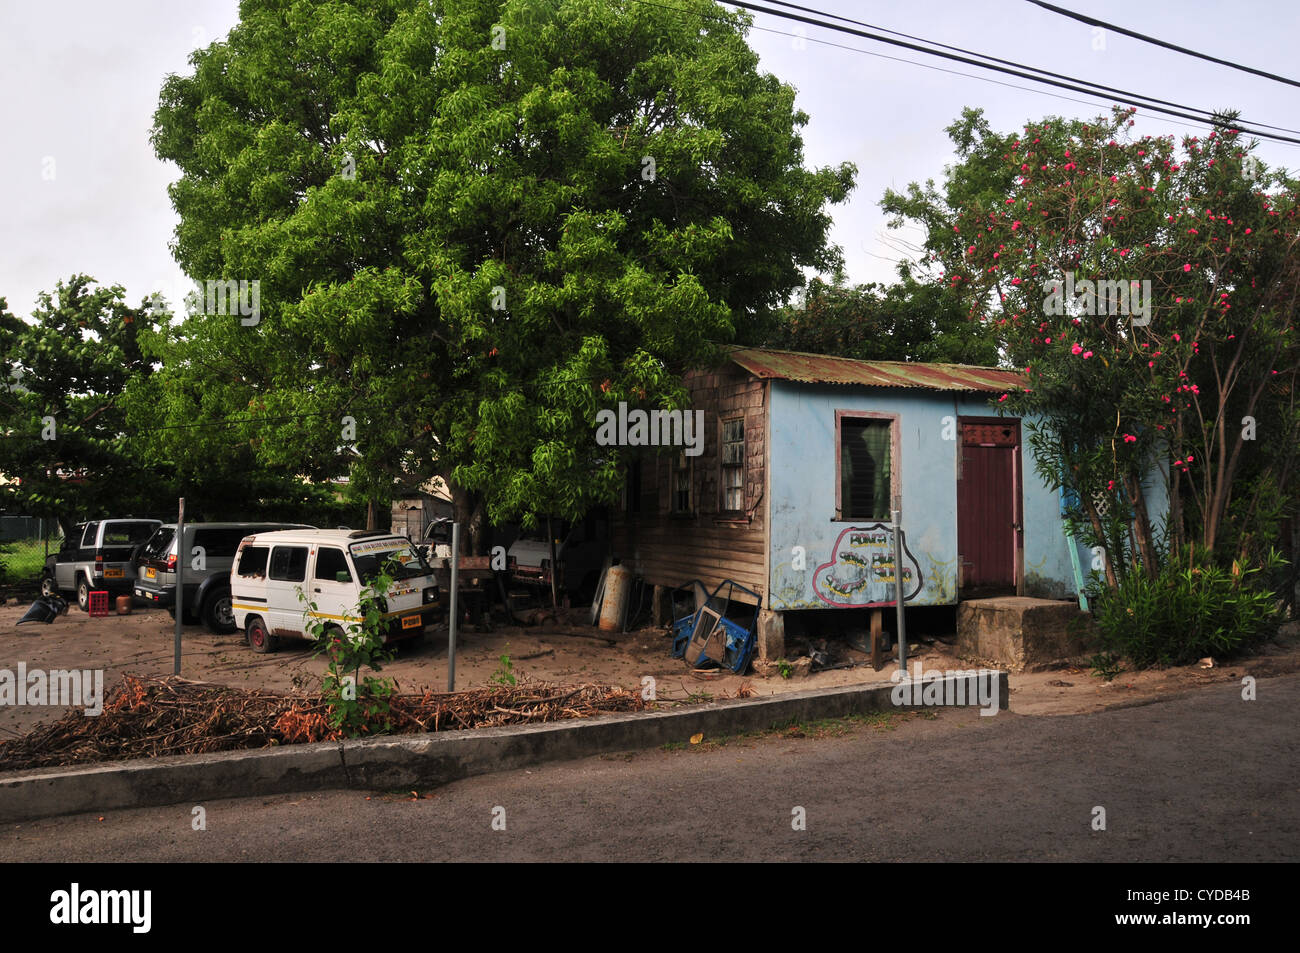 Cars parked earth yard by small blue wooden house, 'Bonga's Blue Studio', Belair Road, Hillsborough, Carriacou, West Indies Stock Photo